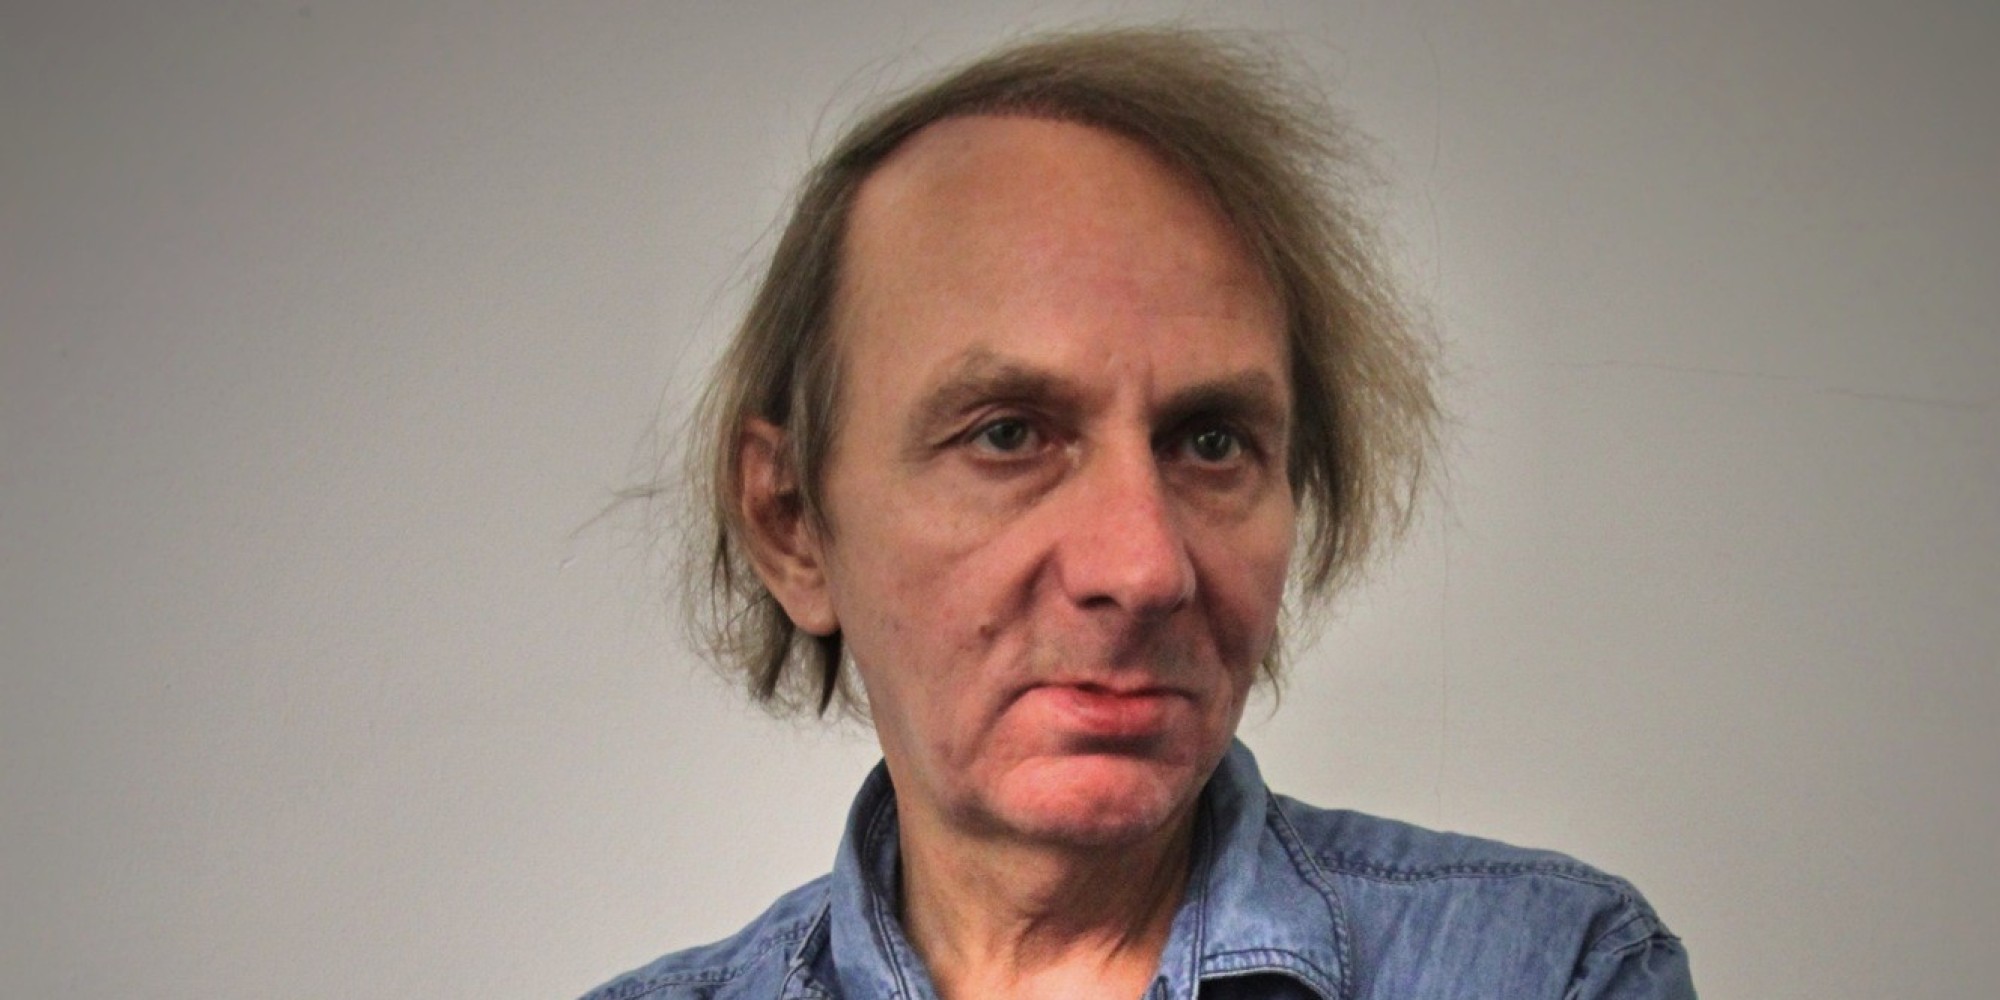 Media fear of Islam 'obsessional': France's Houellebecq